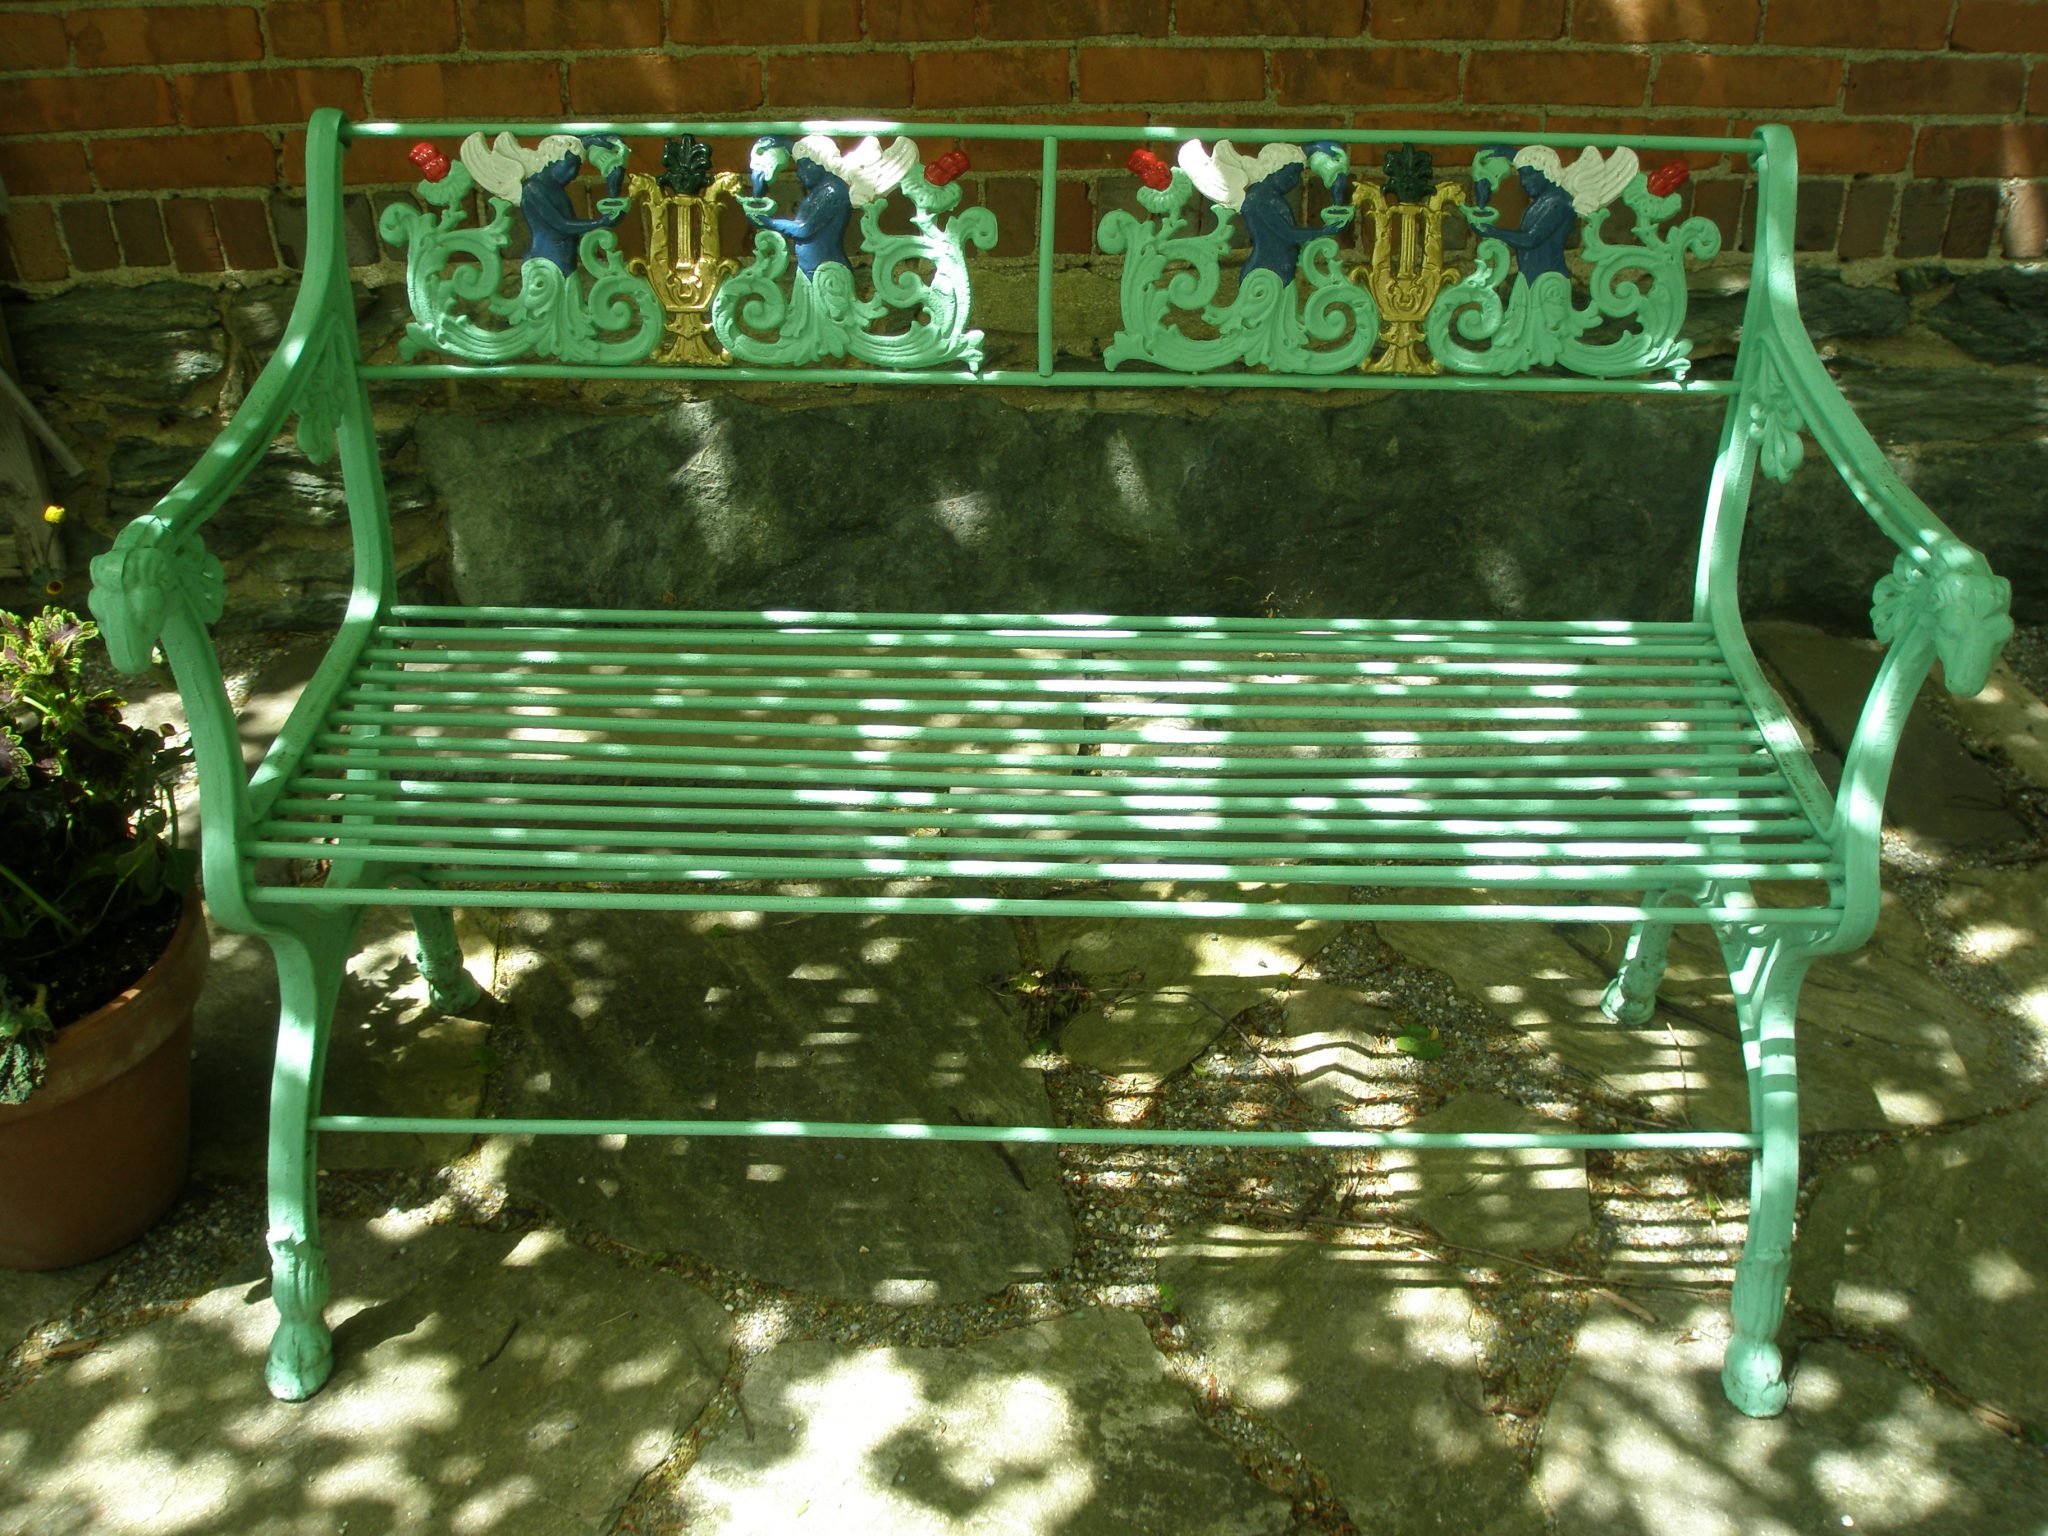 Another uncomfortable bench in the Afternoon Garden